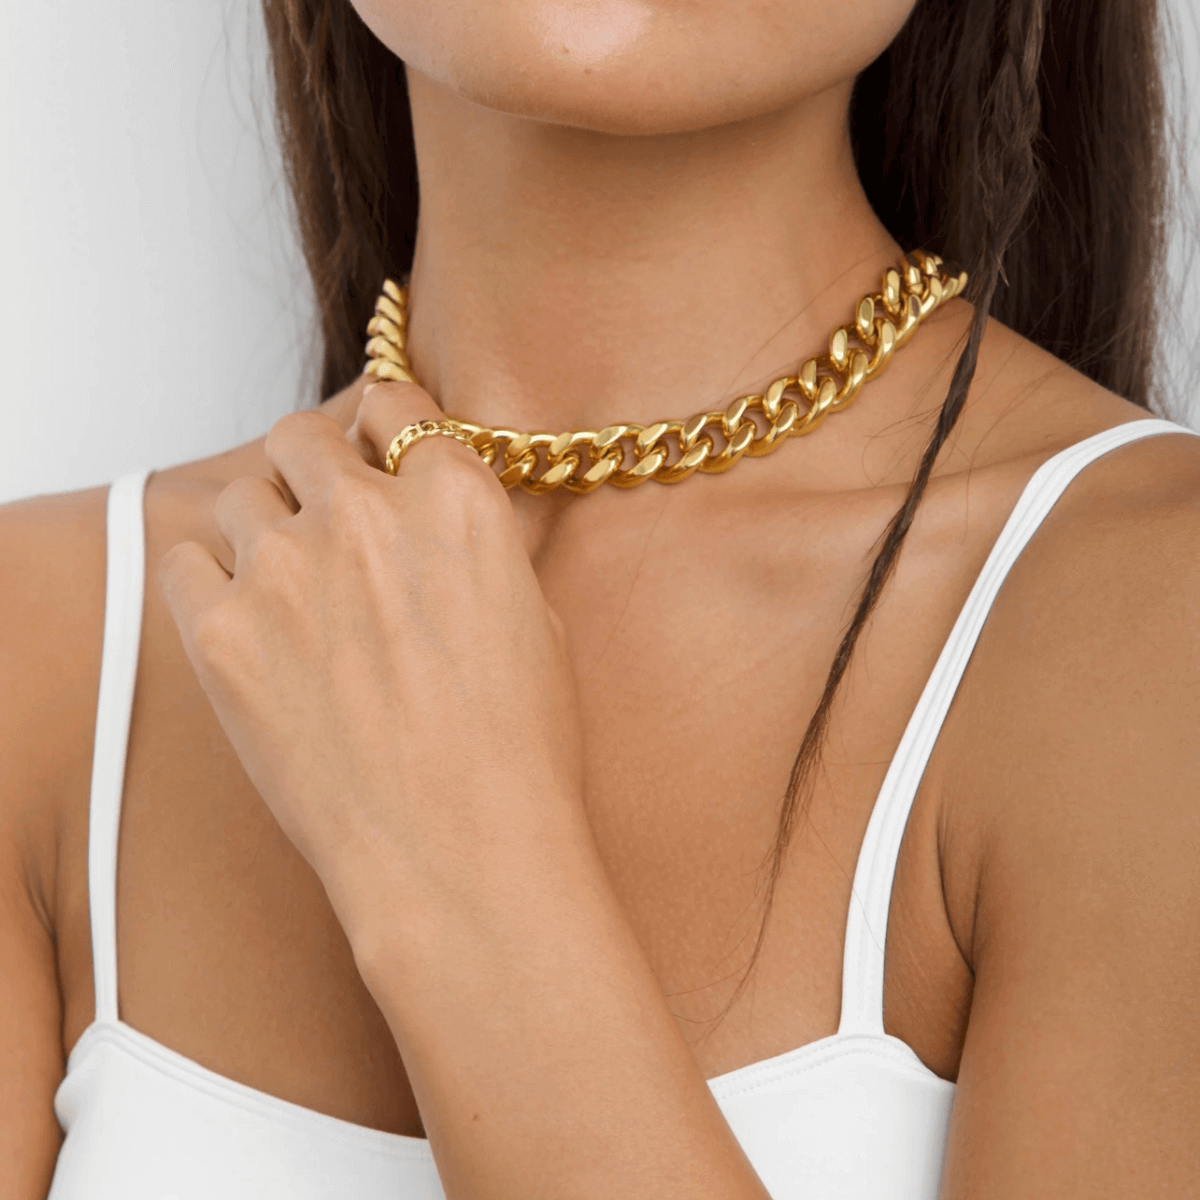 Gold Chunky Cuban Link Chain Necklace for Women | Best 18K Gold Choker Chain Necklace Gift | Mason & Madison Co.